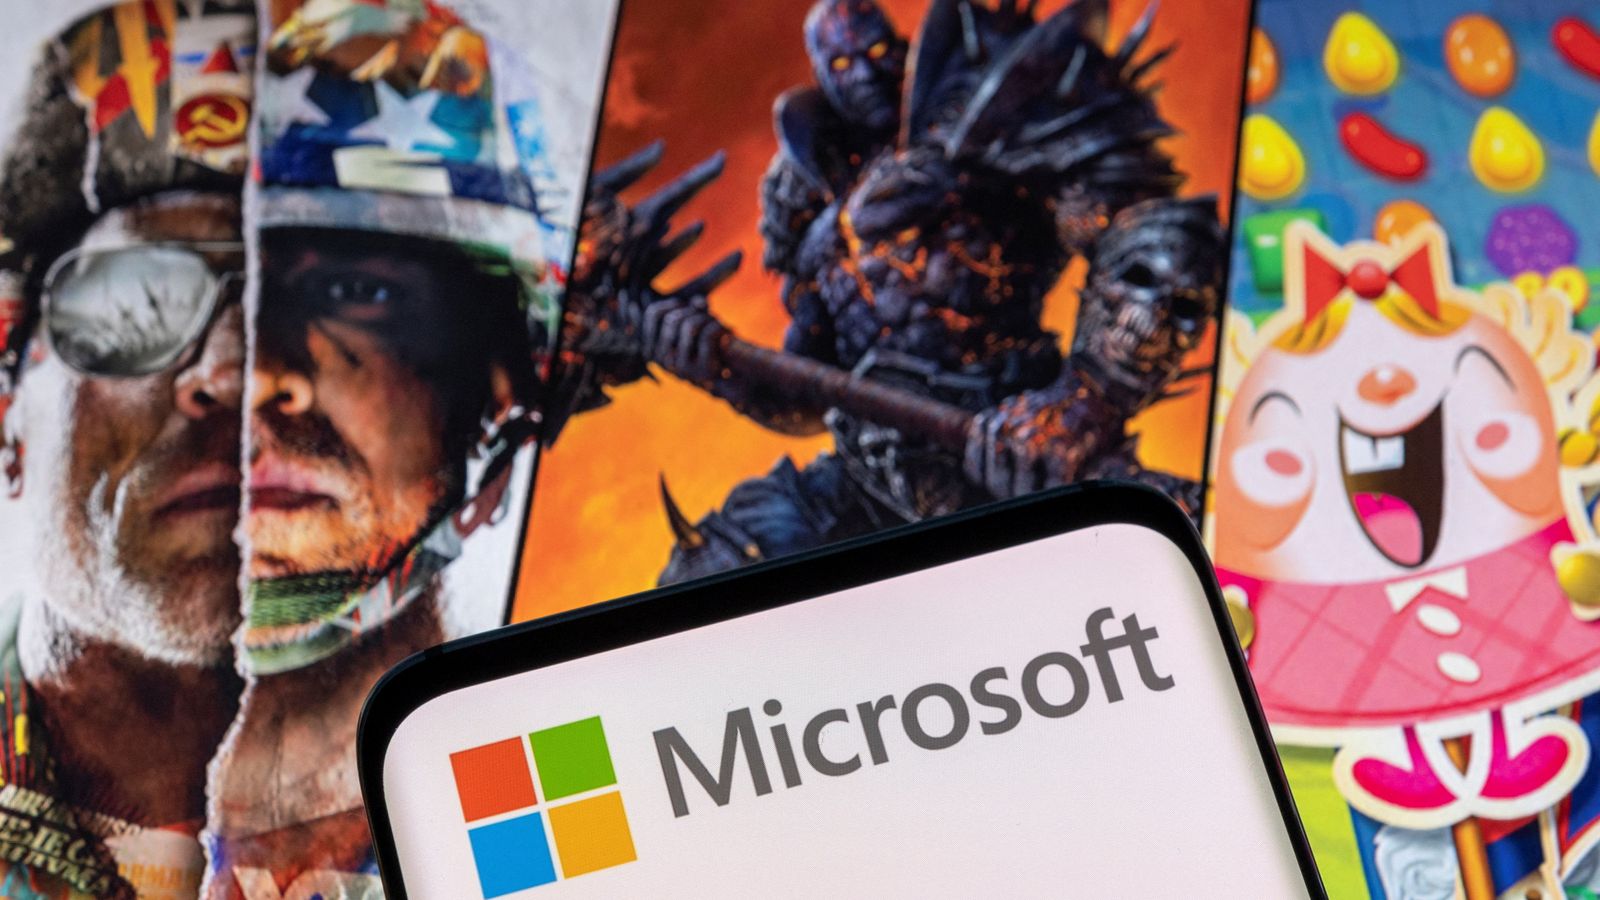 Microsoft blocked in bid to buy video game maker Activision Blizzard - but vows to respond